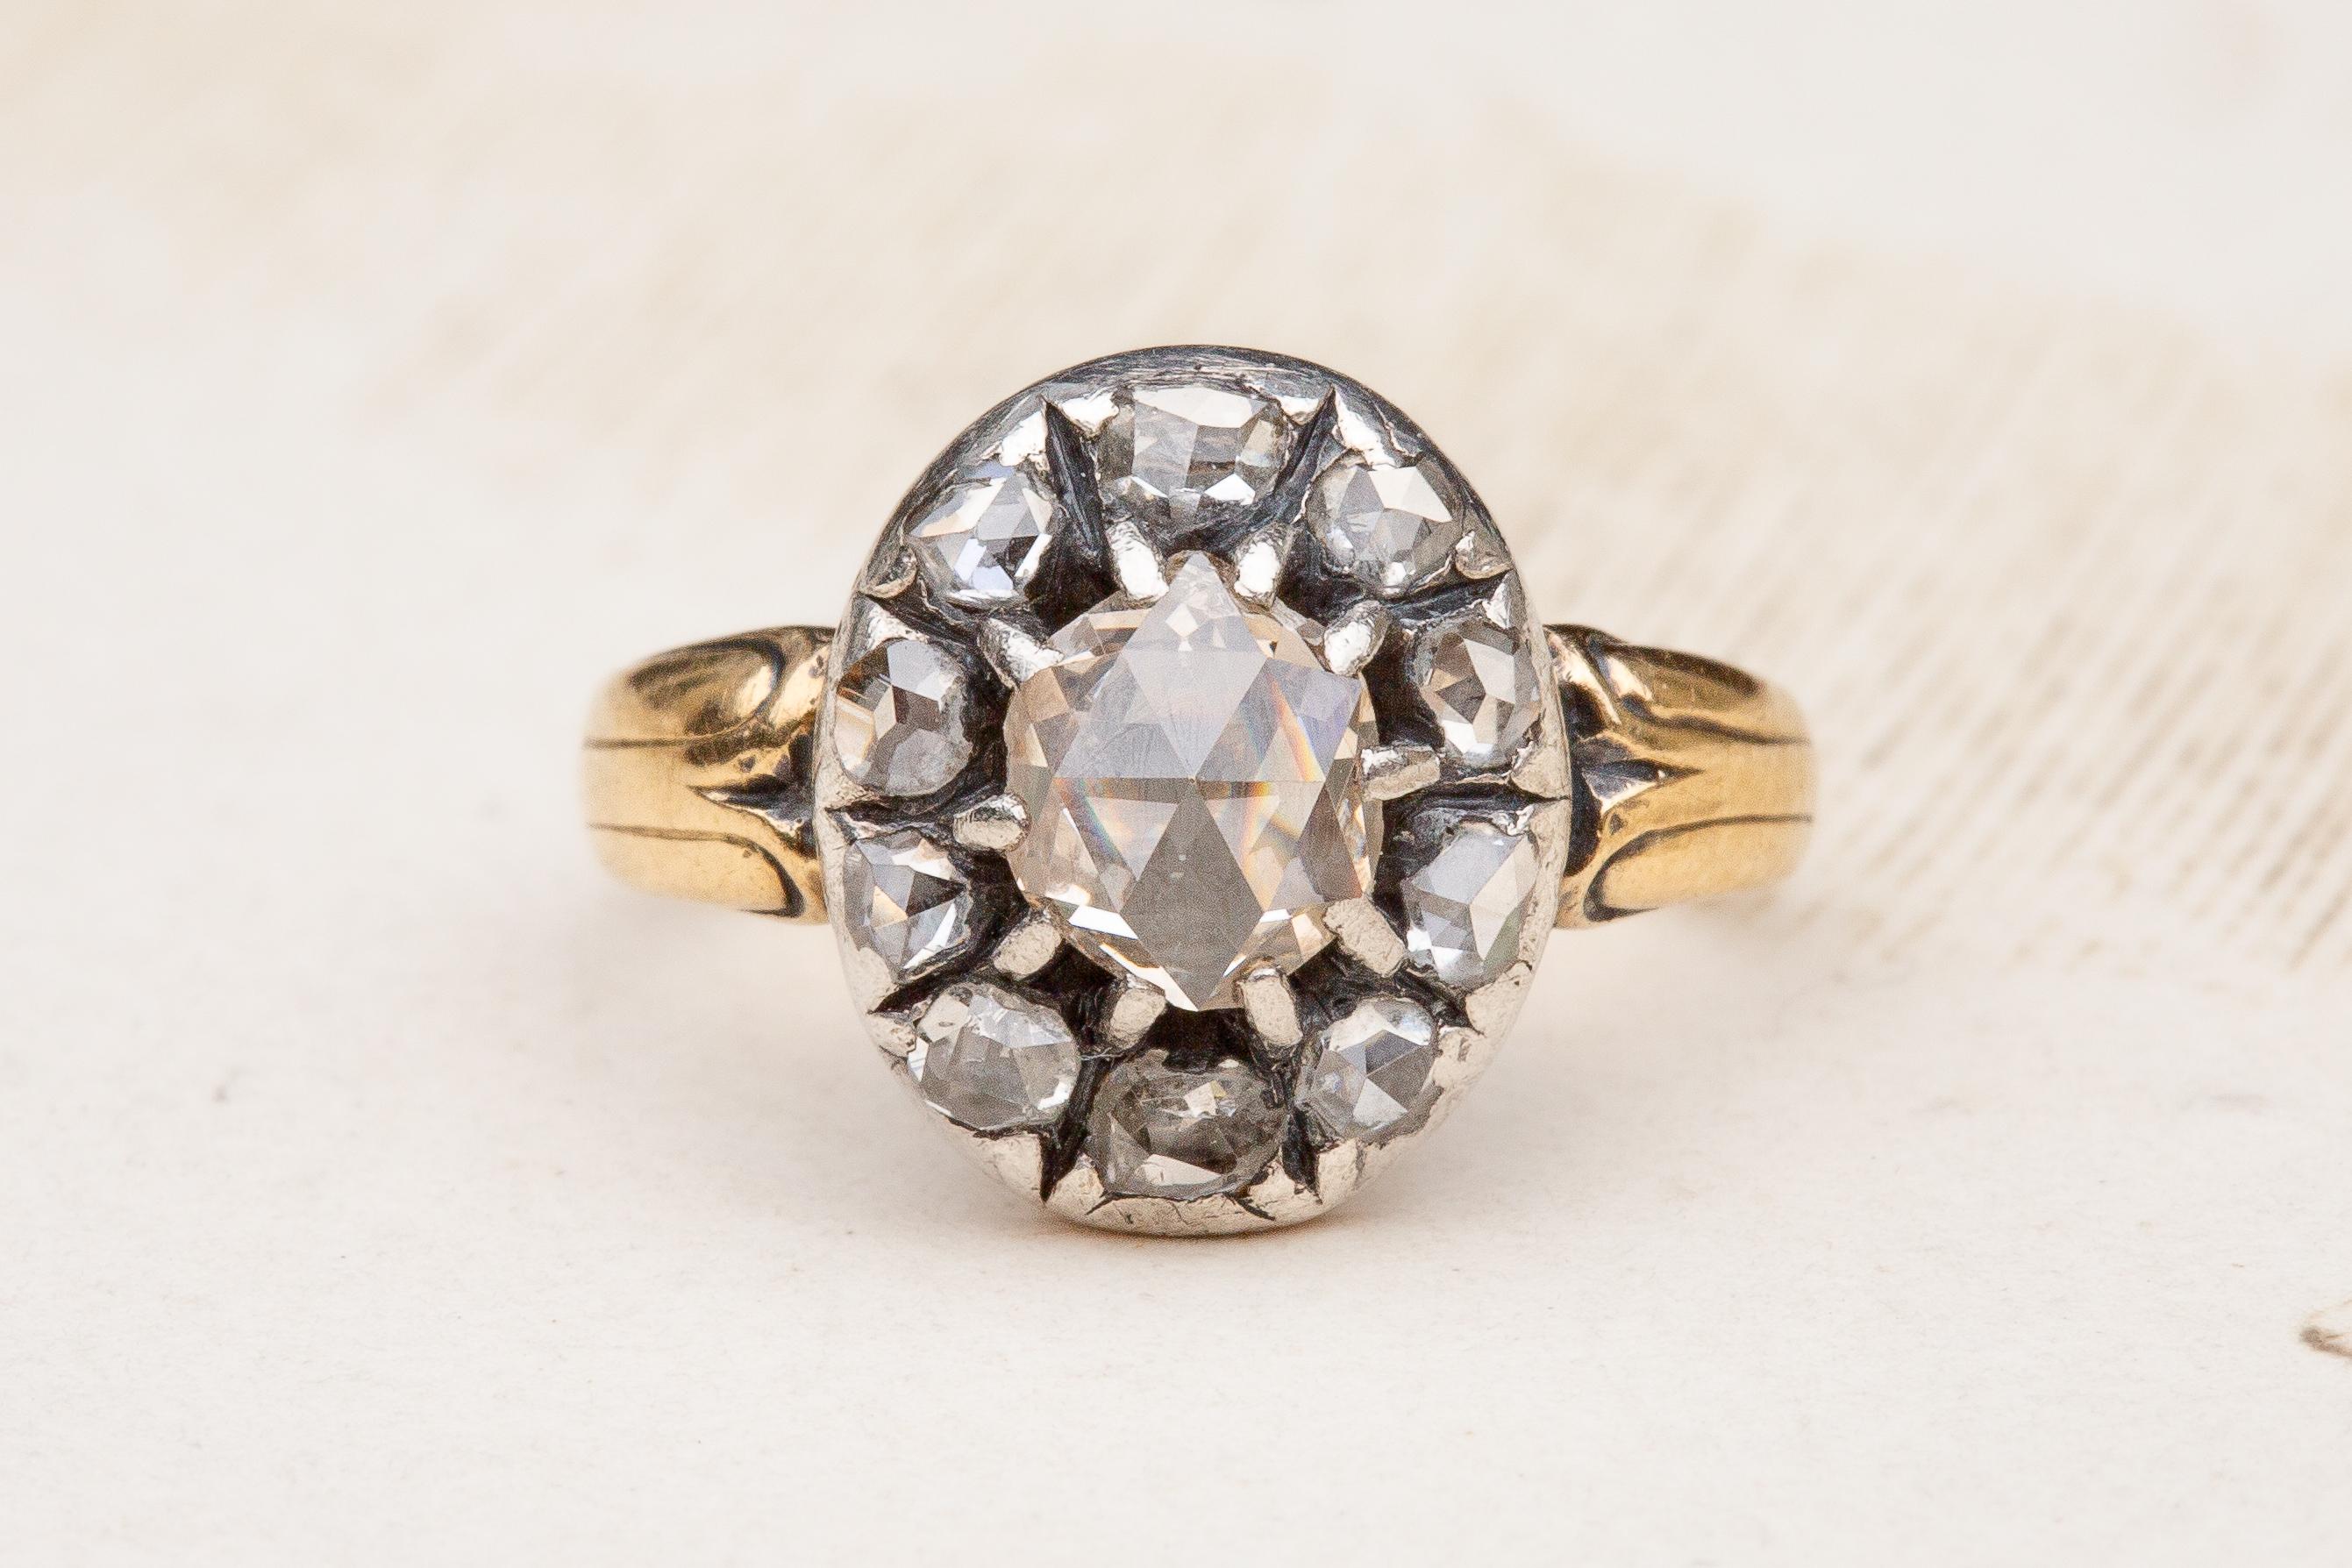 A superb antique early 19th century rose cut diamond cluster ring. 

The silver-topped gold bezel exhibits a gorgeous central domed rose cut diamond of fantastic clarity and a subtle pinkish champagne colour. It is held in position with silver